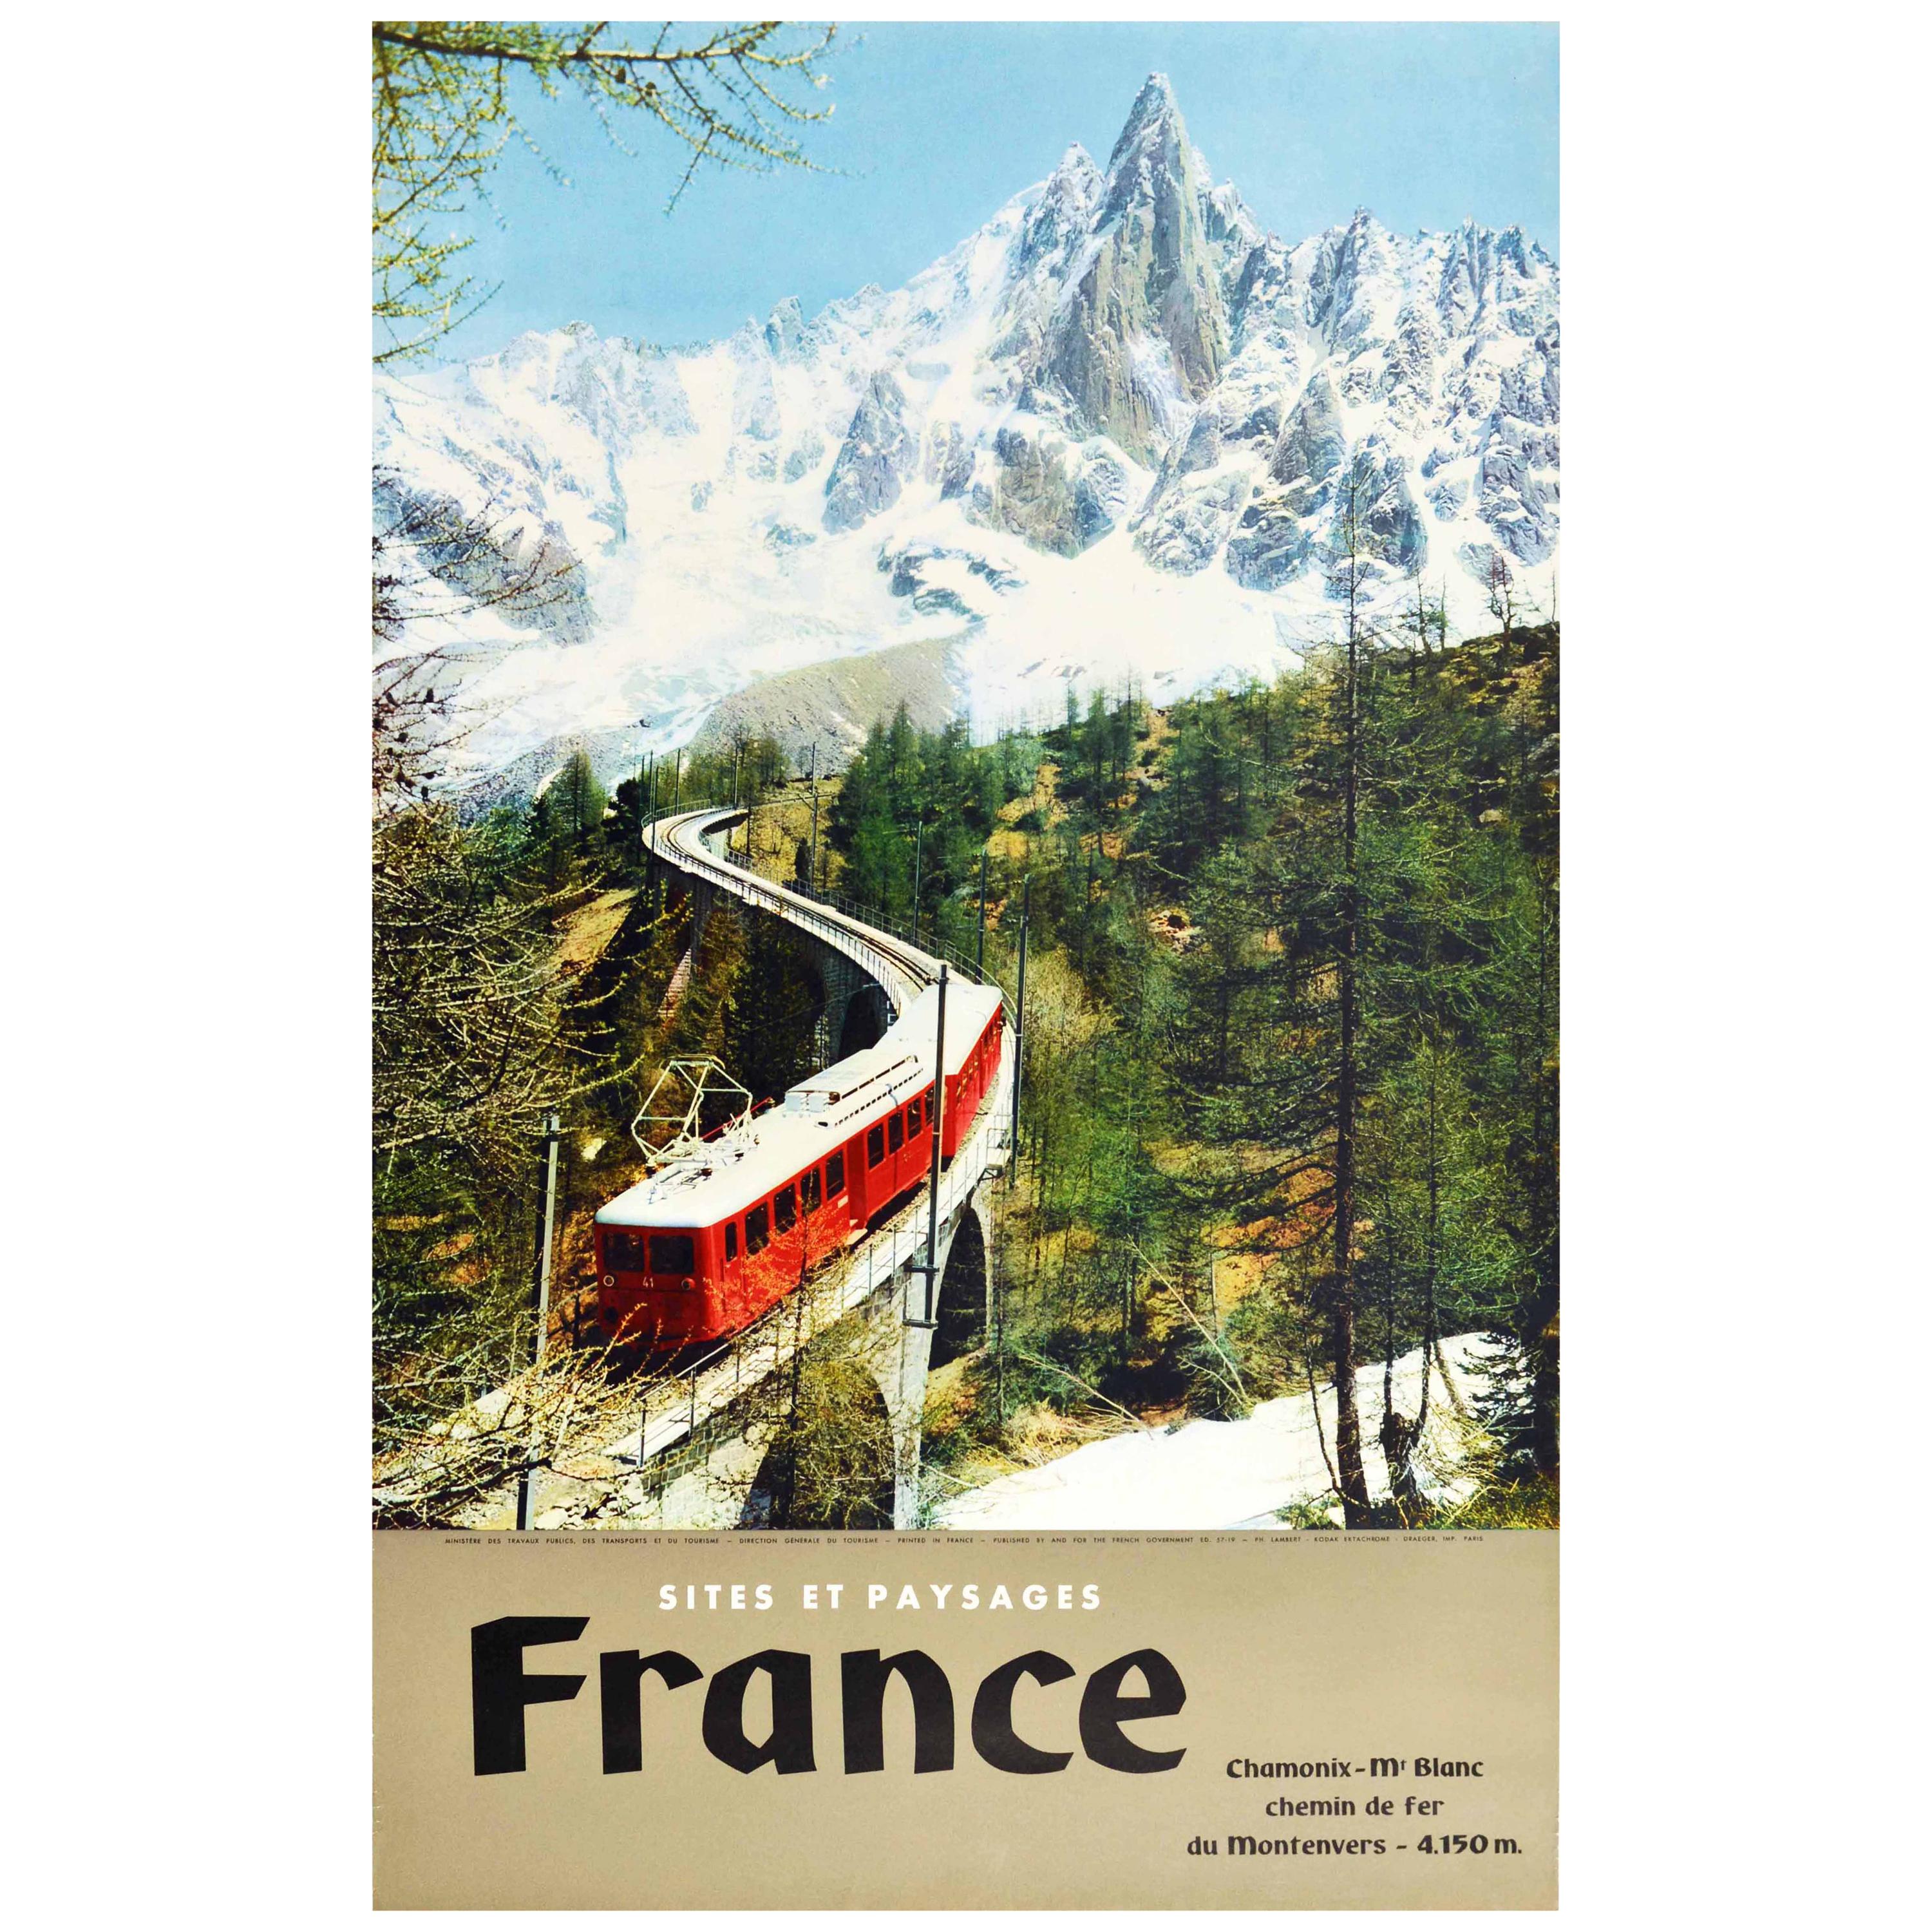 France Mont Blanc French National Railroad train travel poster 16x24 